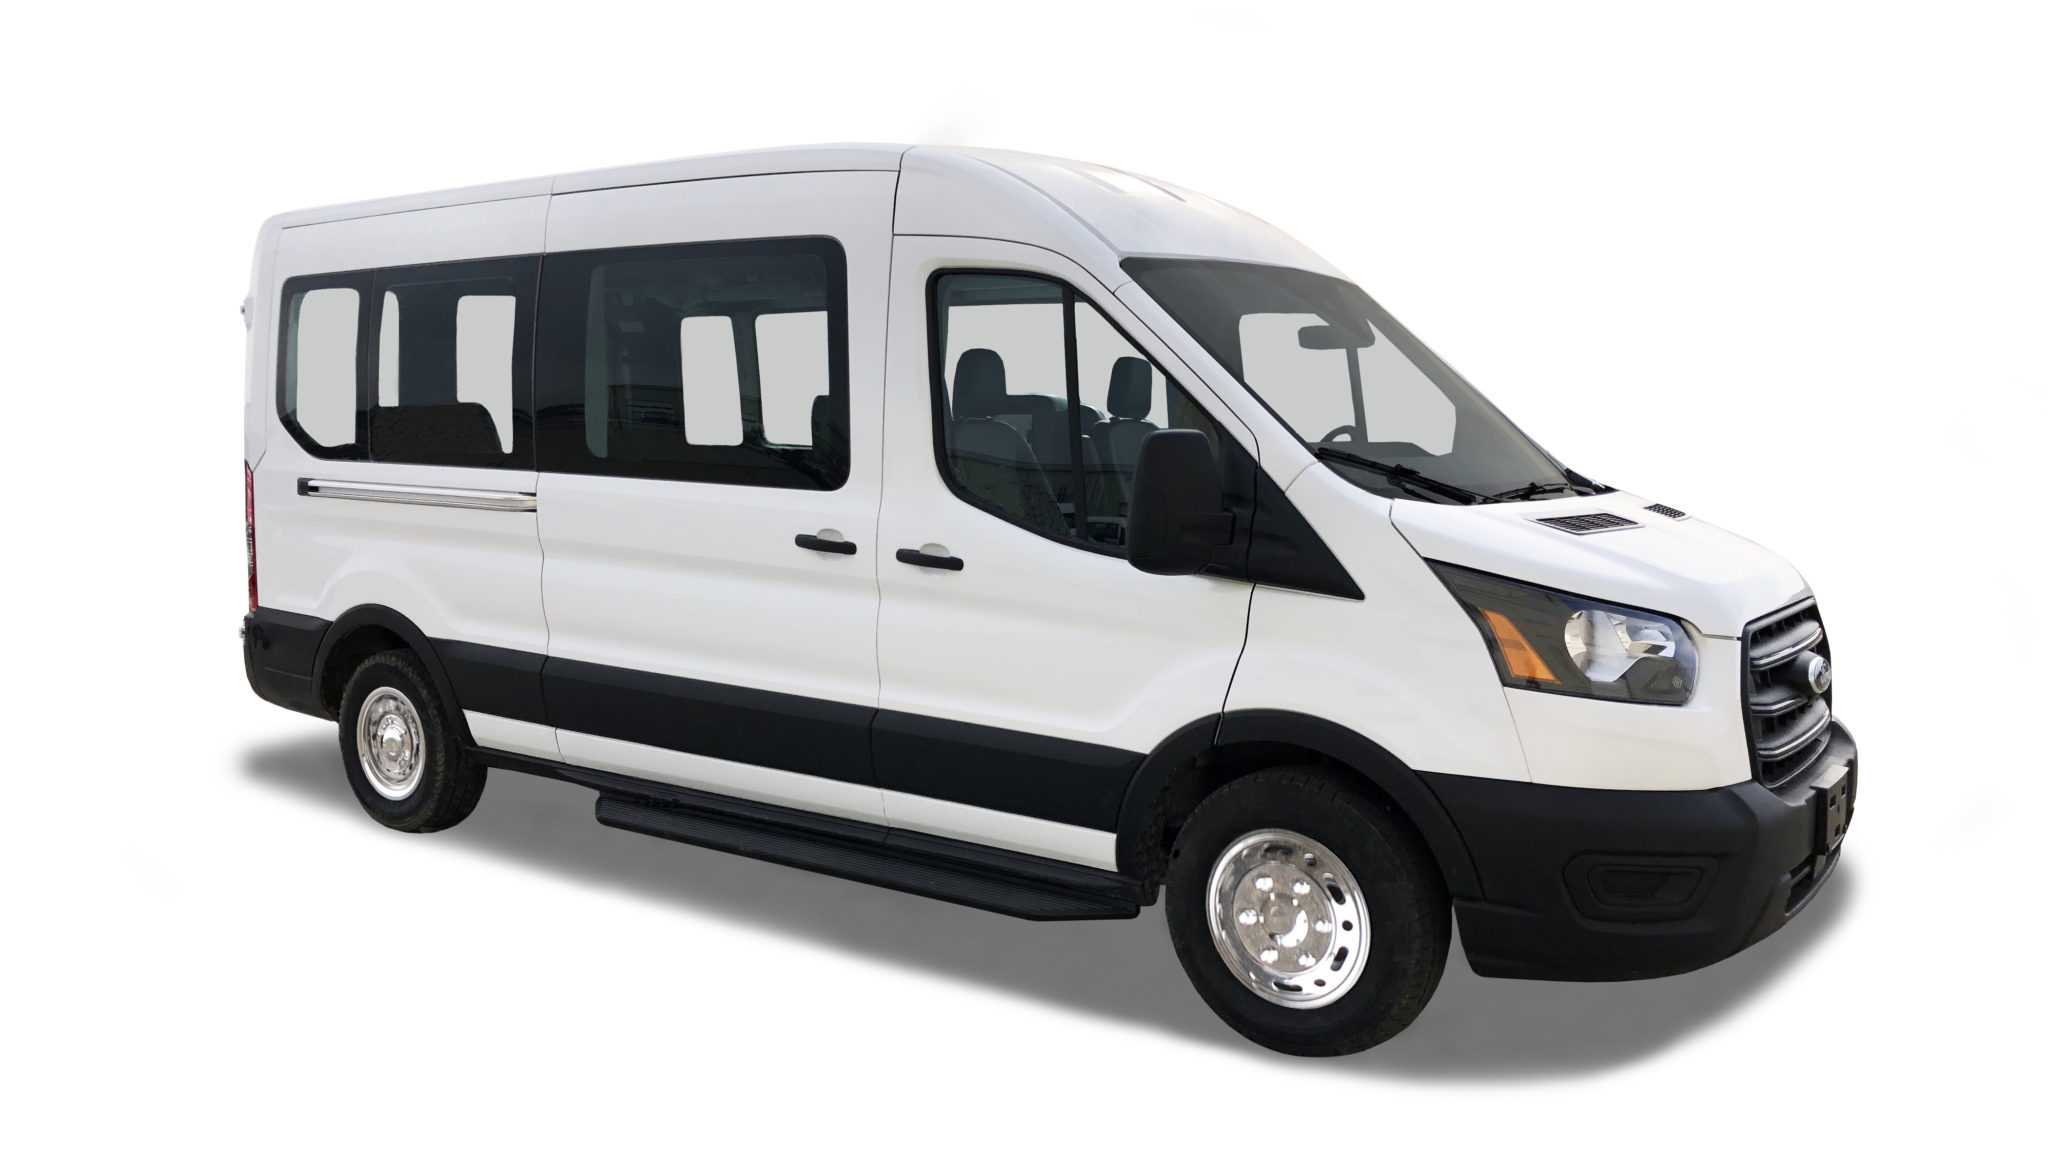 The Forest River Van is a handicap-accessible wheelchair van for sale.